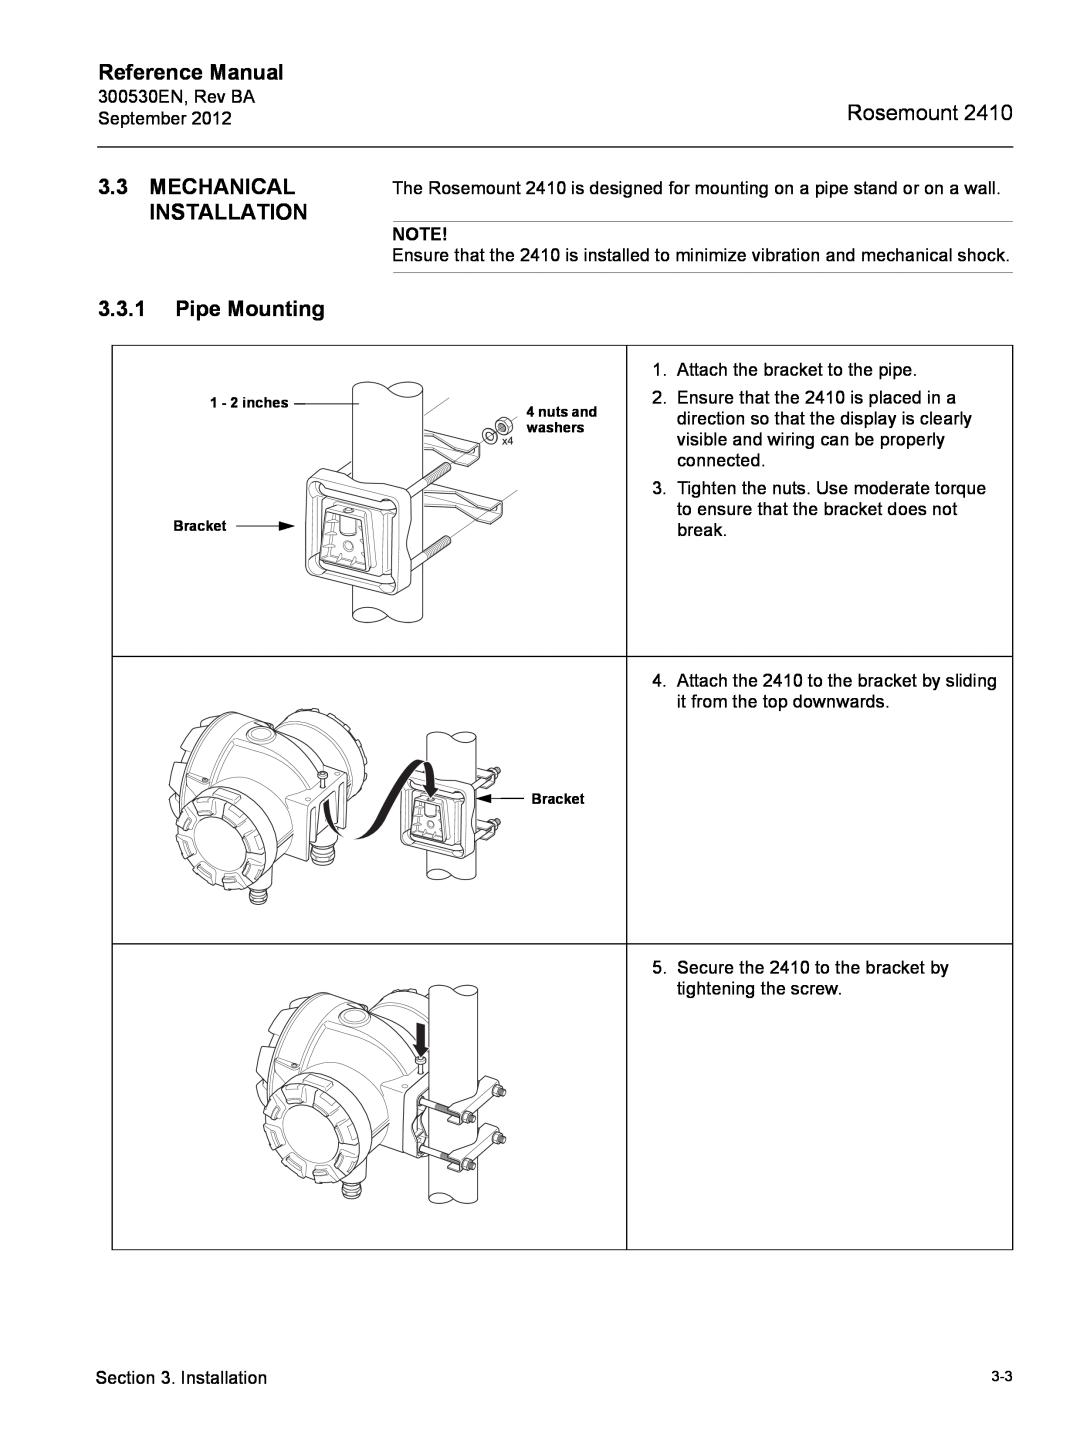 Emerson Process Management Rosemount 2410 Mechanical Installation, Pipe Mounting, Reference Manual, 1 - 2 inches Bracket 